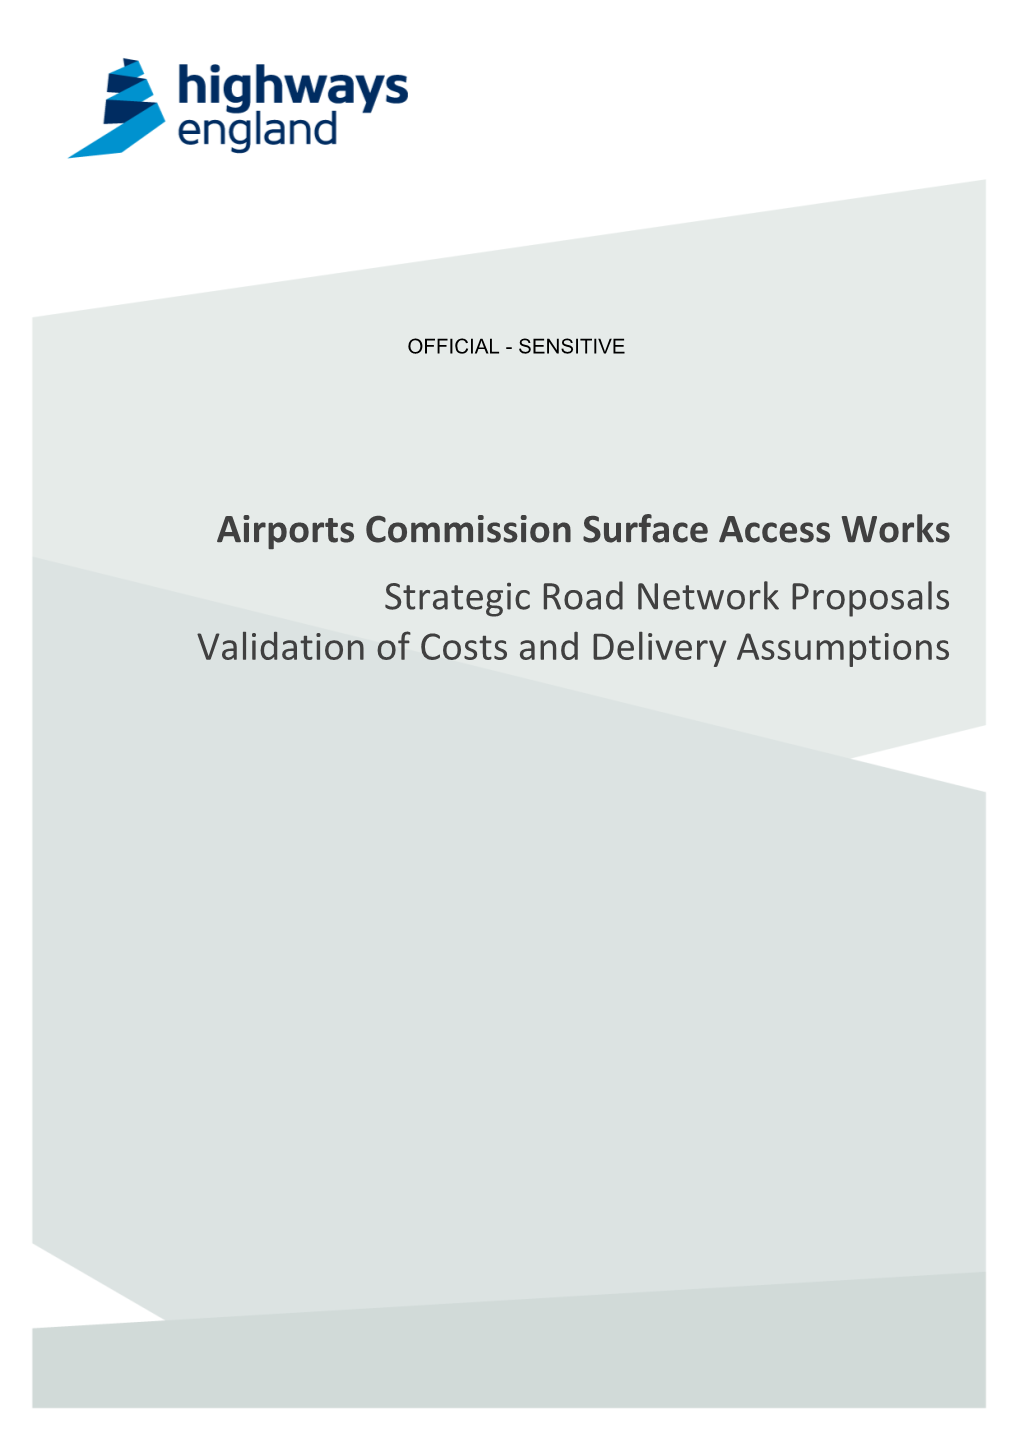 Airports Commission Surface Access Works: Strategic Road